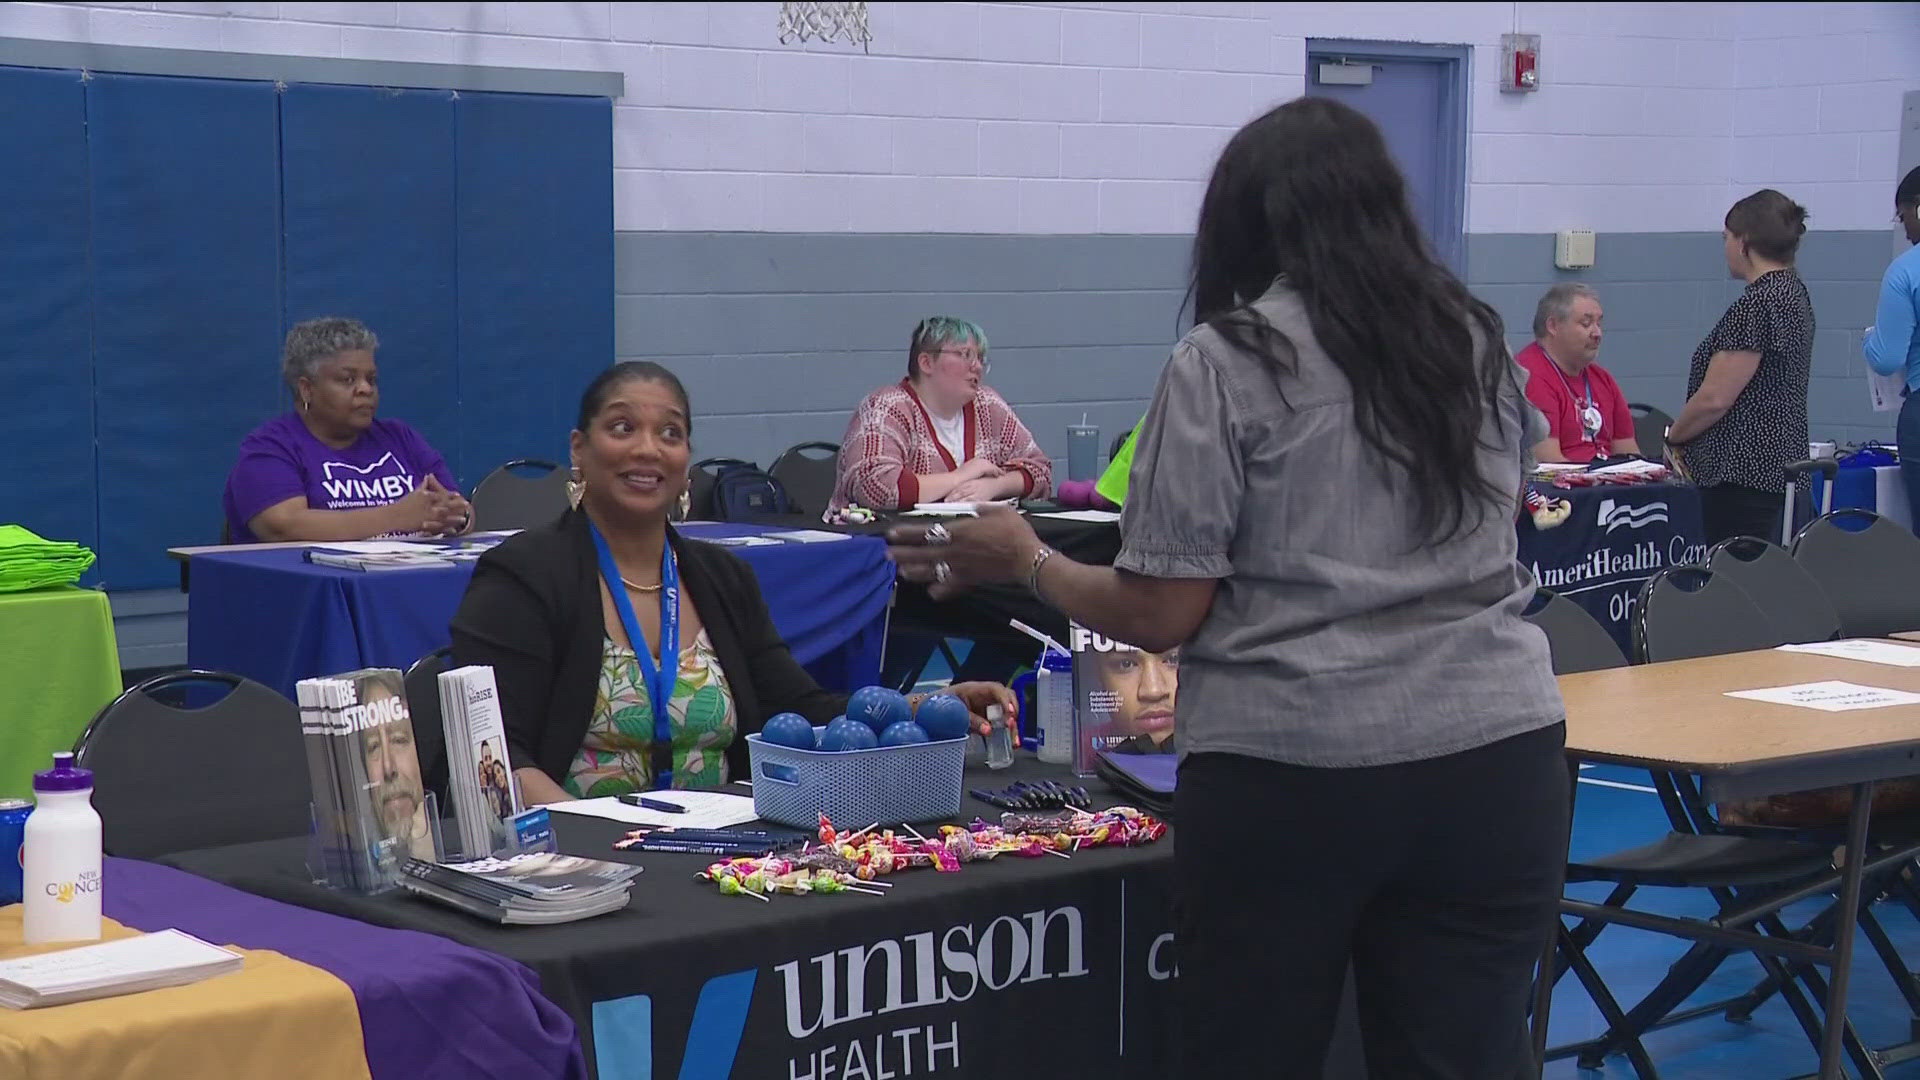 The East Toledo Family Center is hosting the 2nd annual mental health fair.